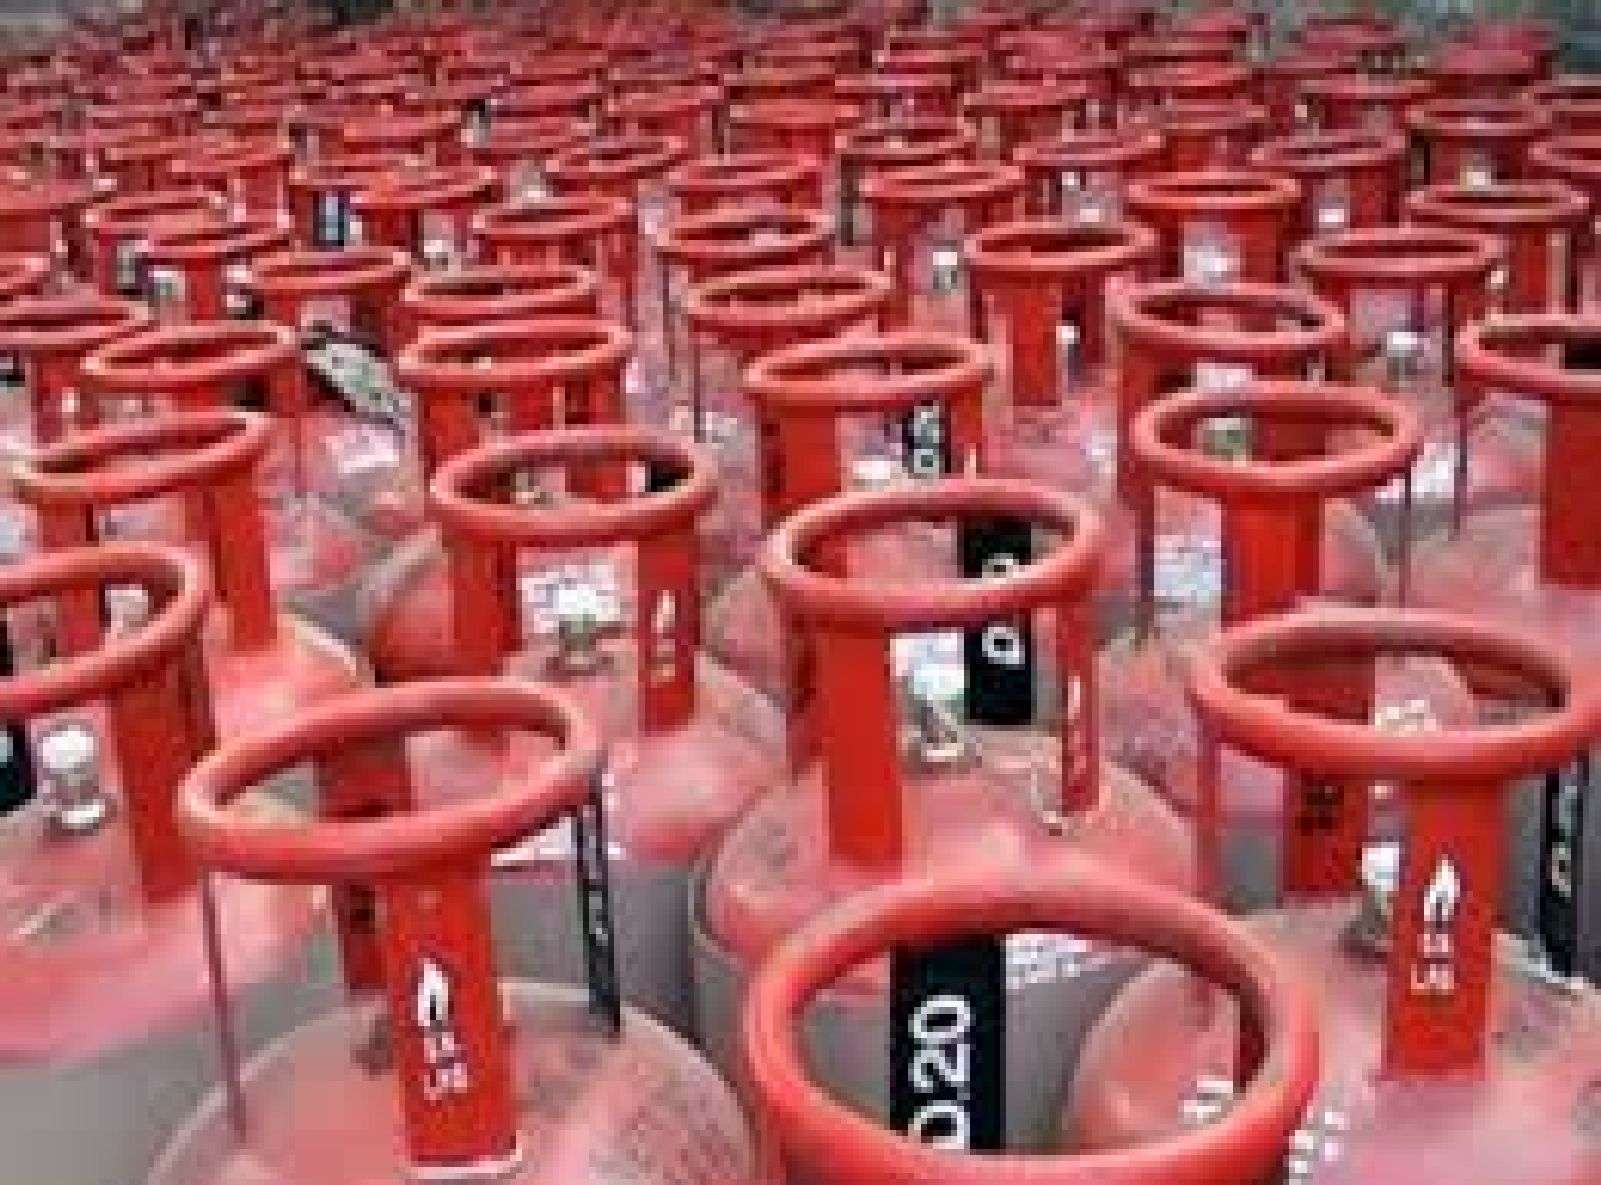 Burhanpur: Inflation, 60 percent gas refills are not being done in Ujjwala scheme